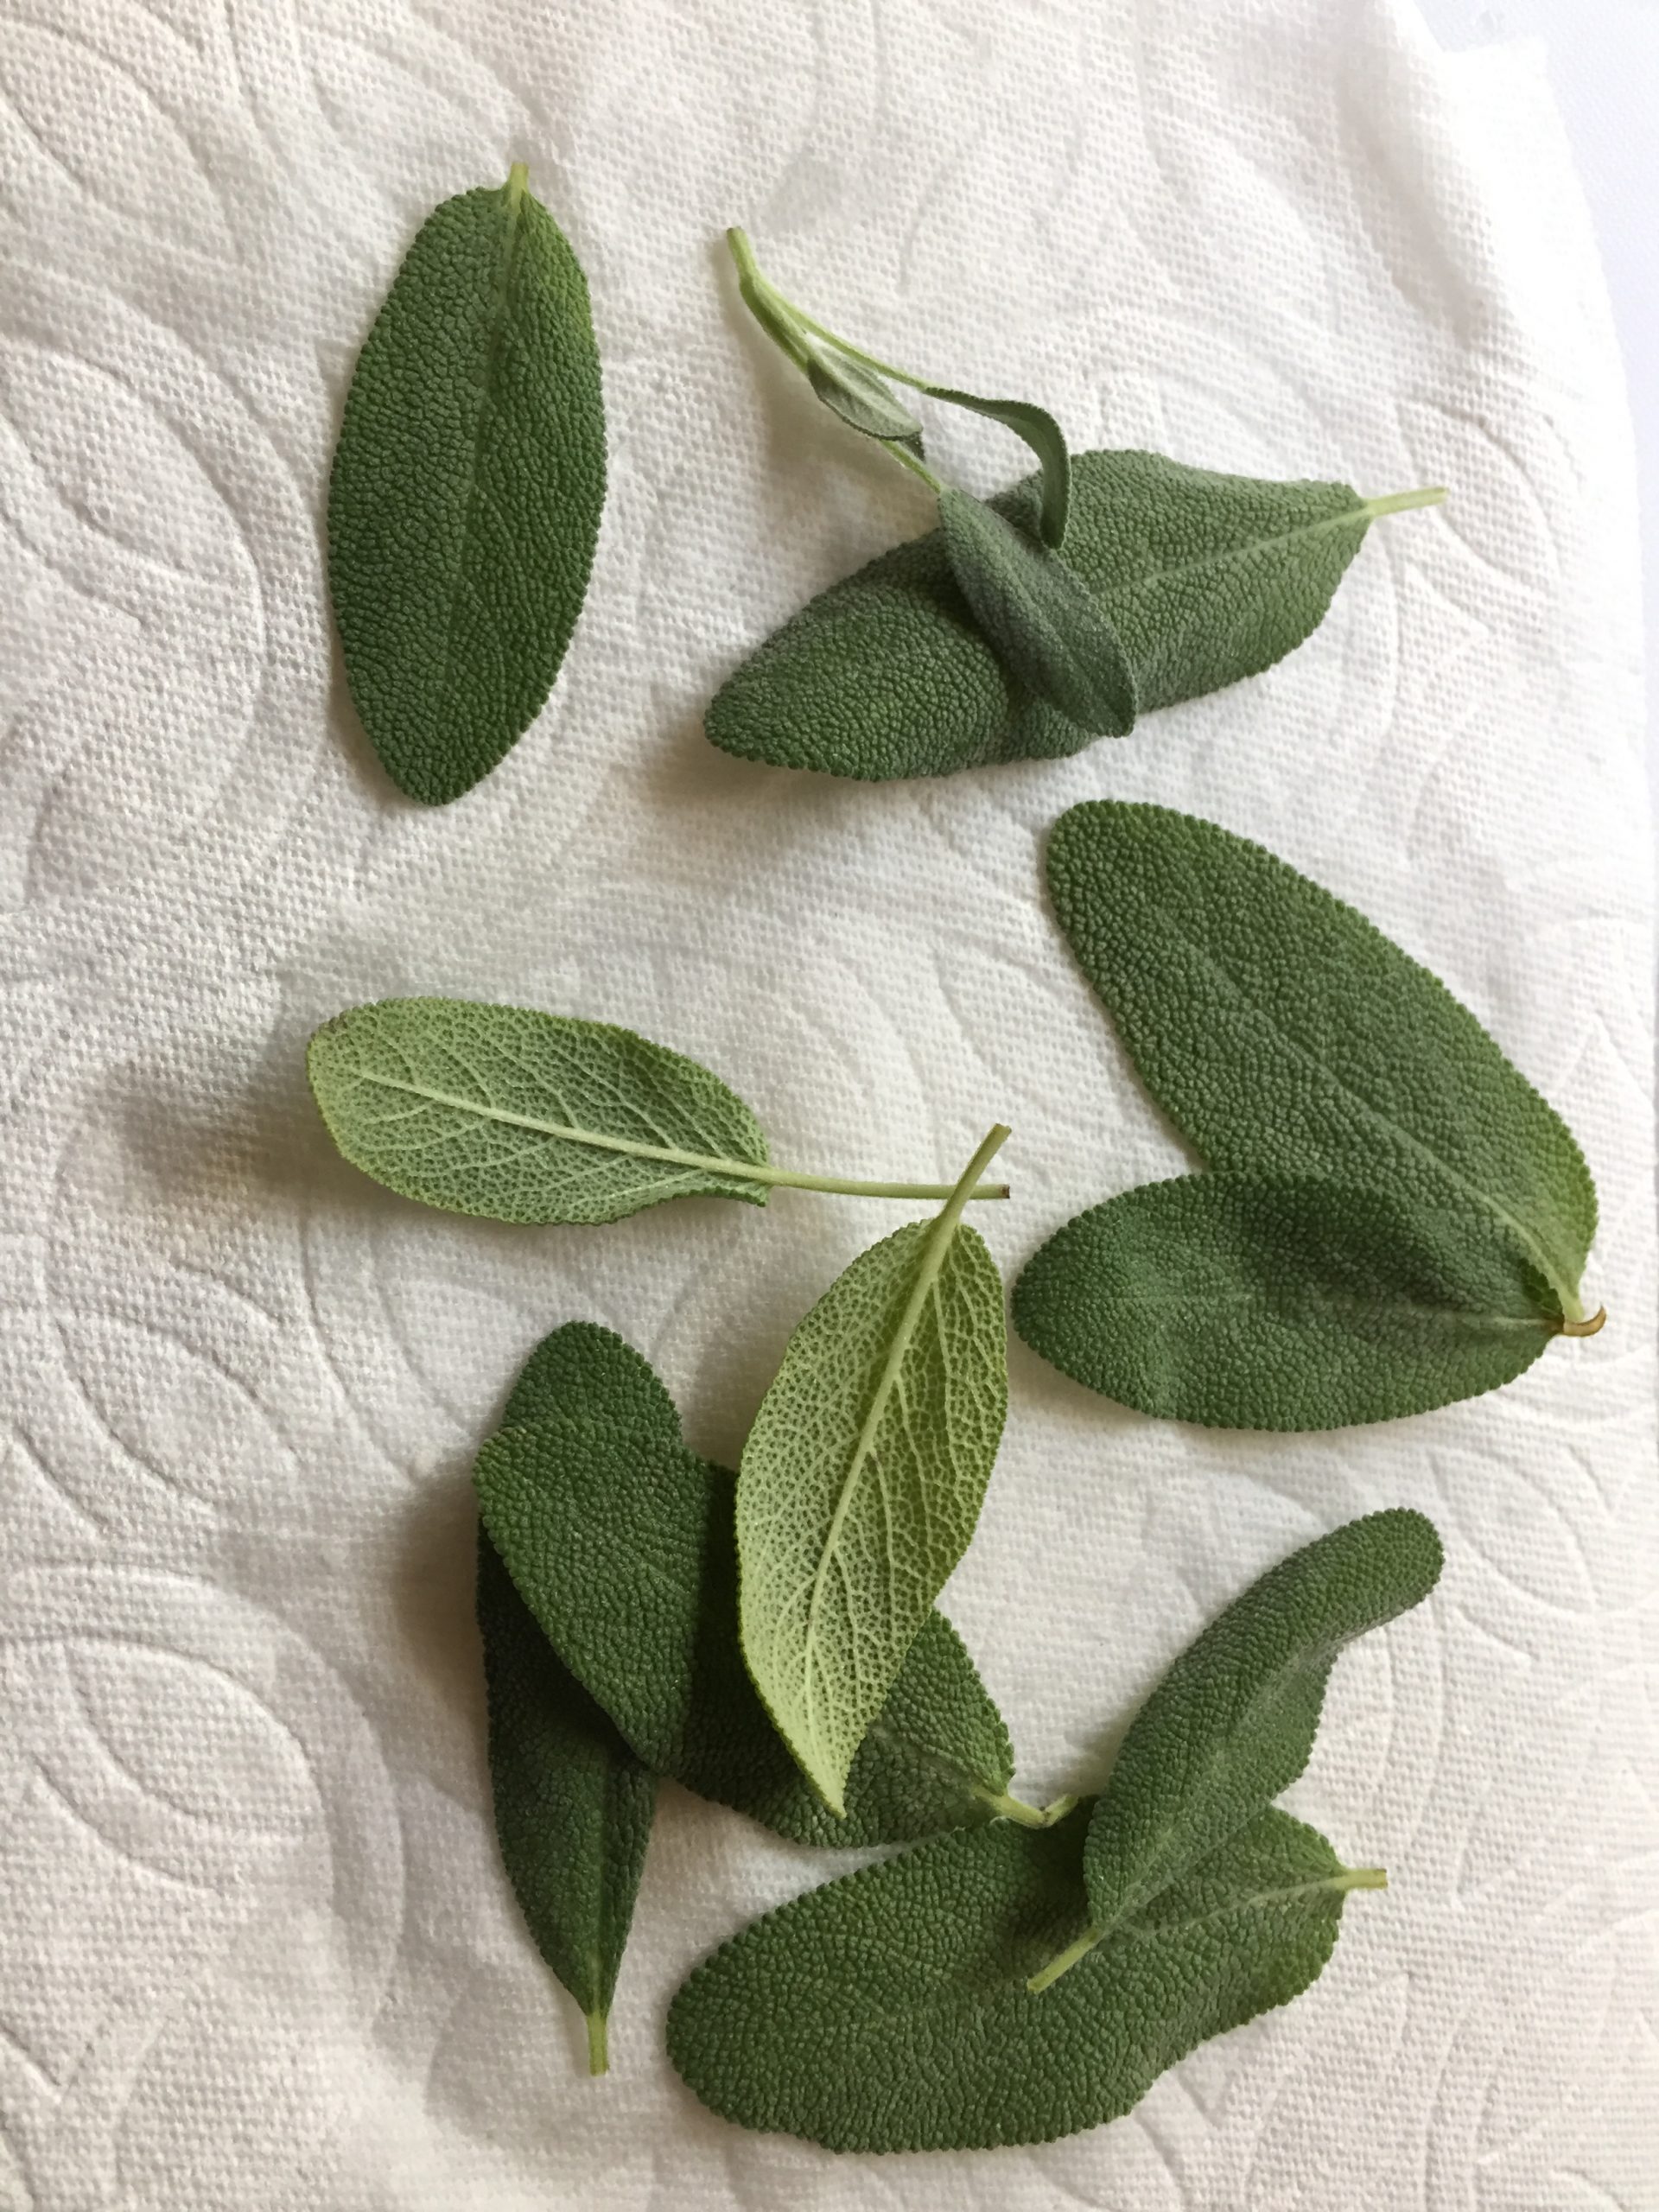 Clean and dried sage leaves